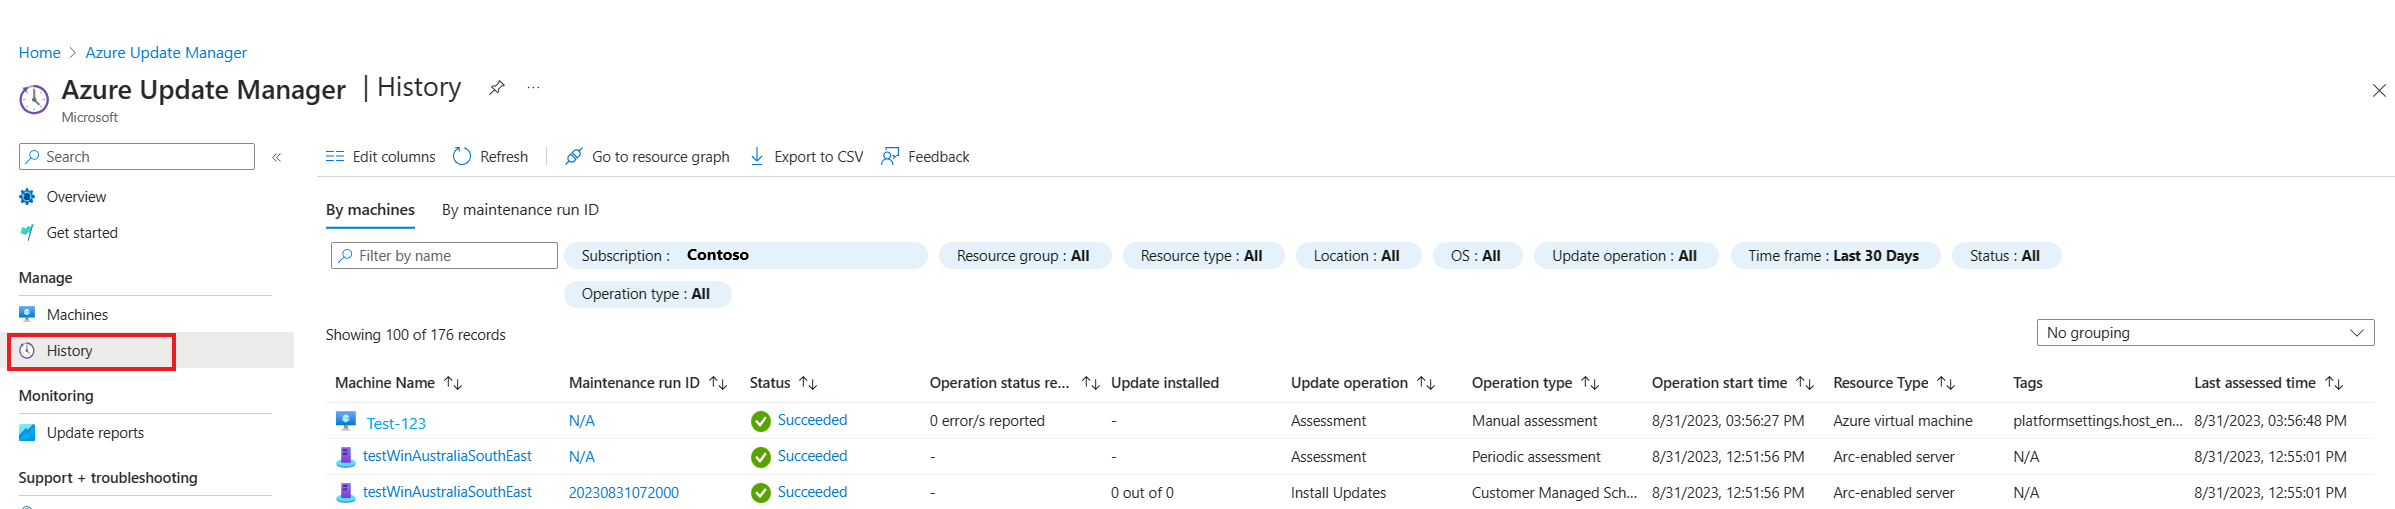 Screenshot of update center History page in the Azure portal.